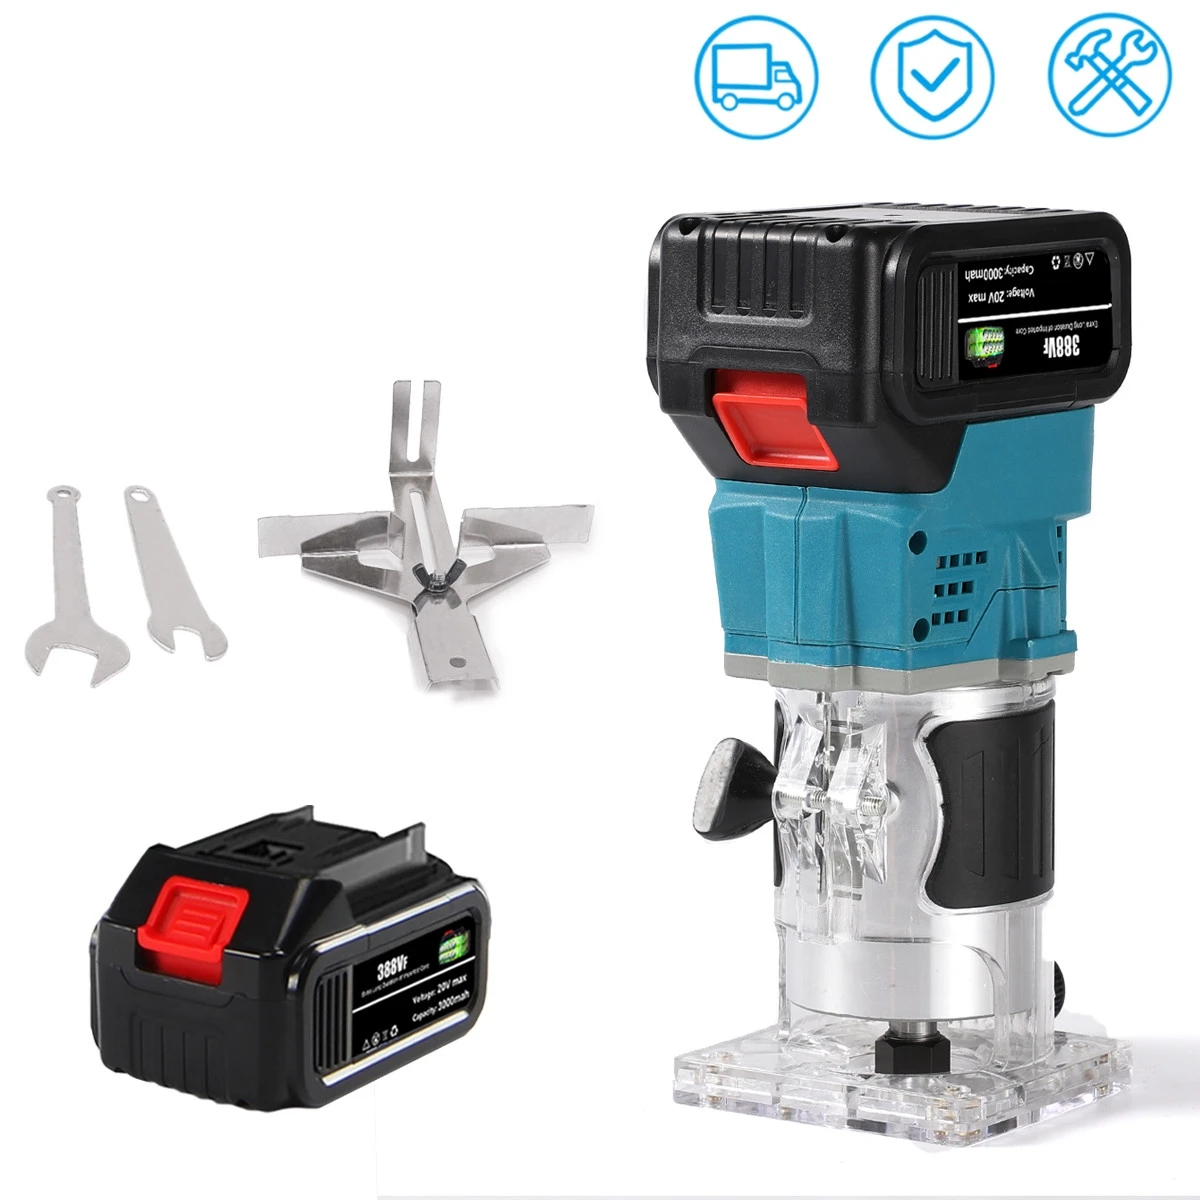 Cordless Electric Trimmer Woodworking Engraving Slotting Trimming Milling Machine Wood Router 6 Gears For Makita 18V Battery